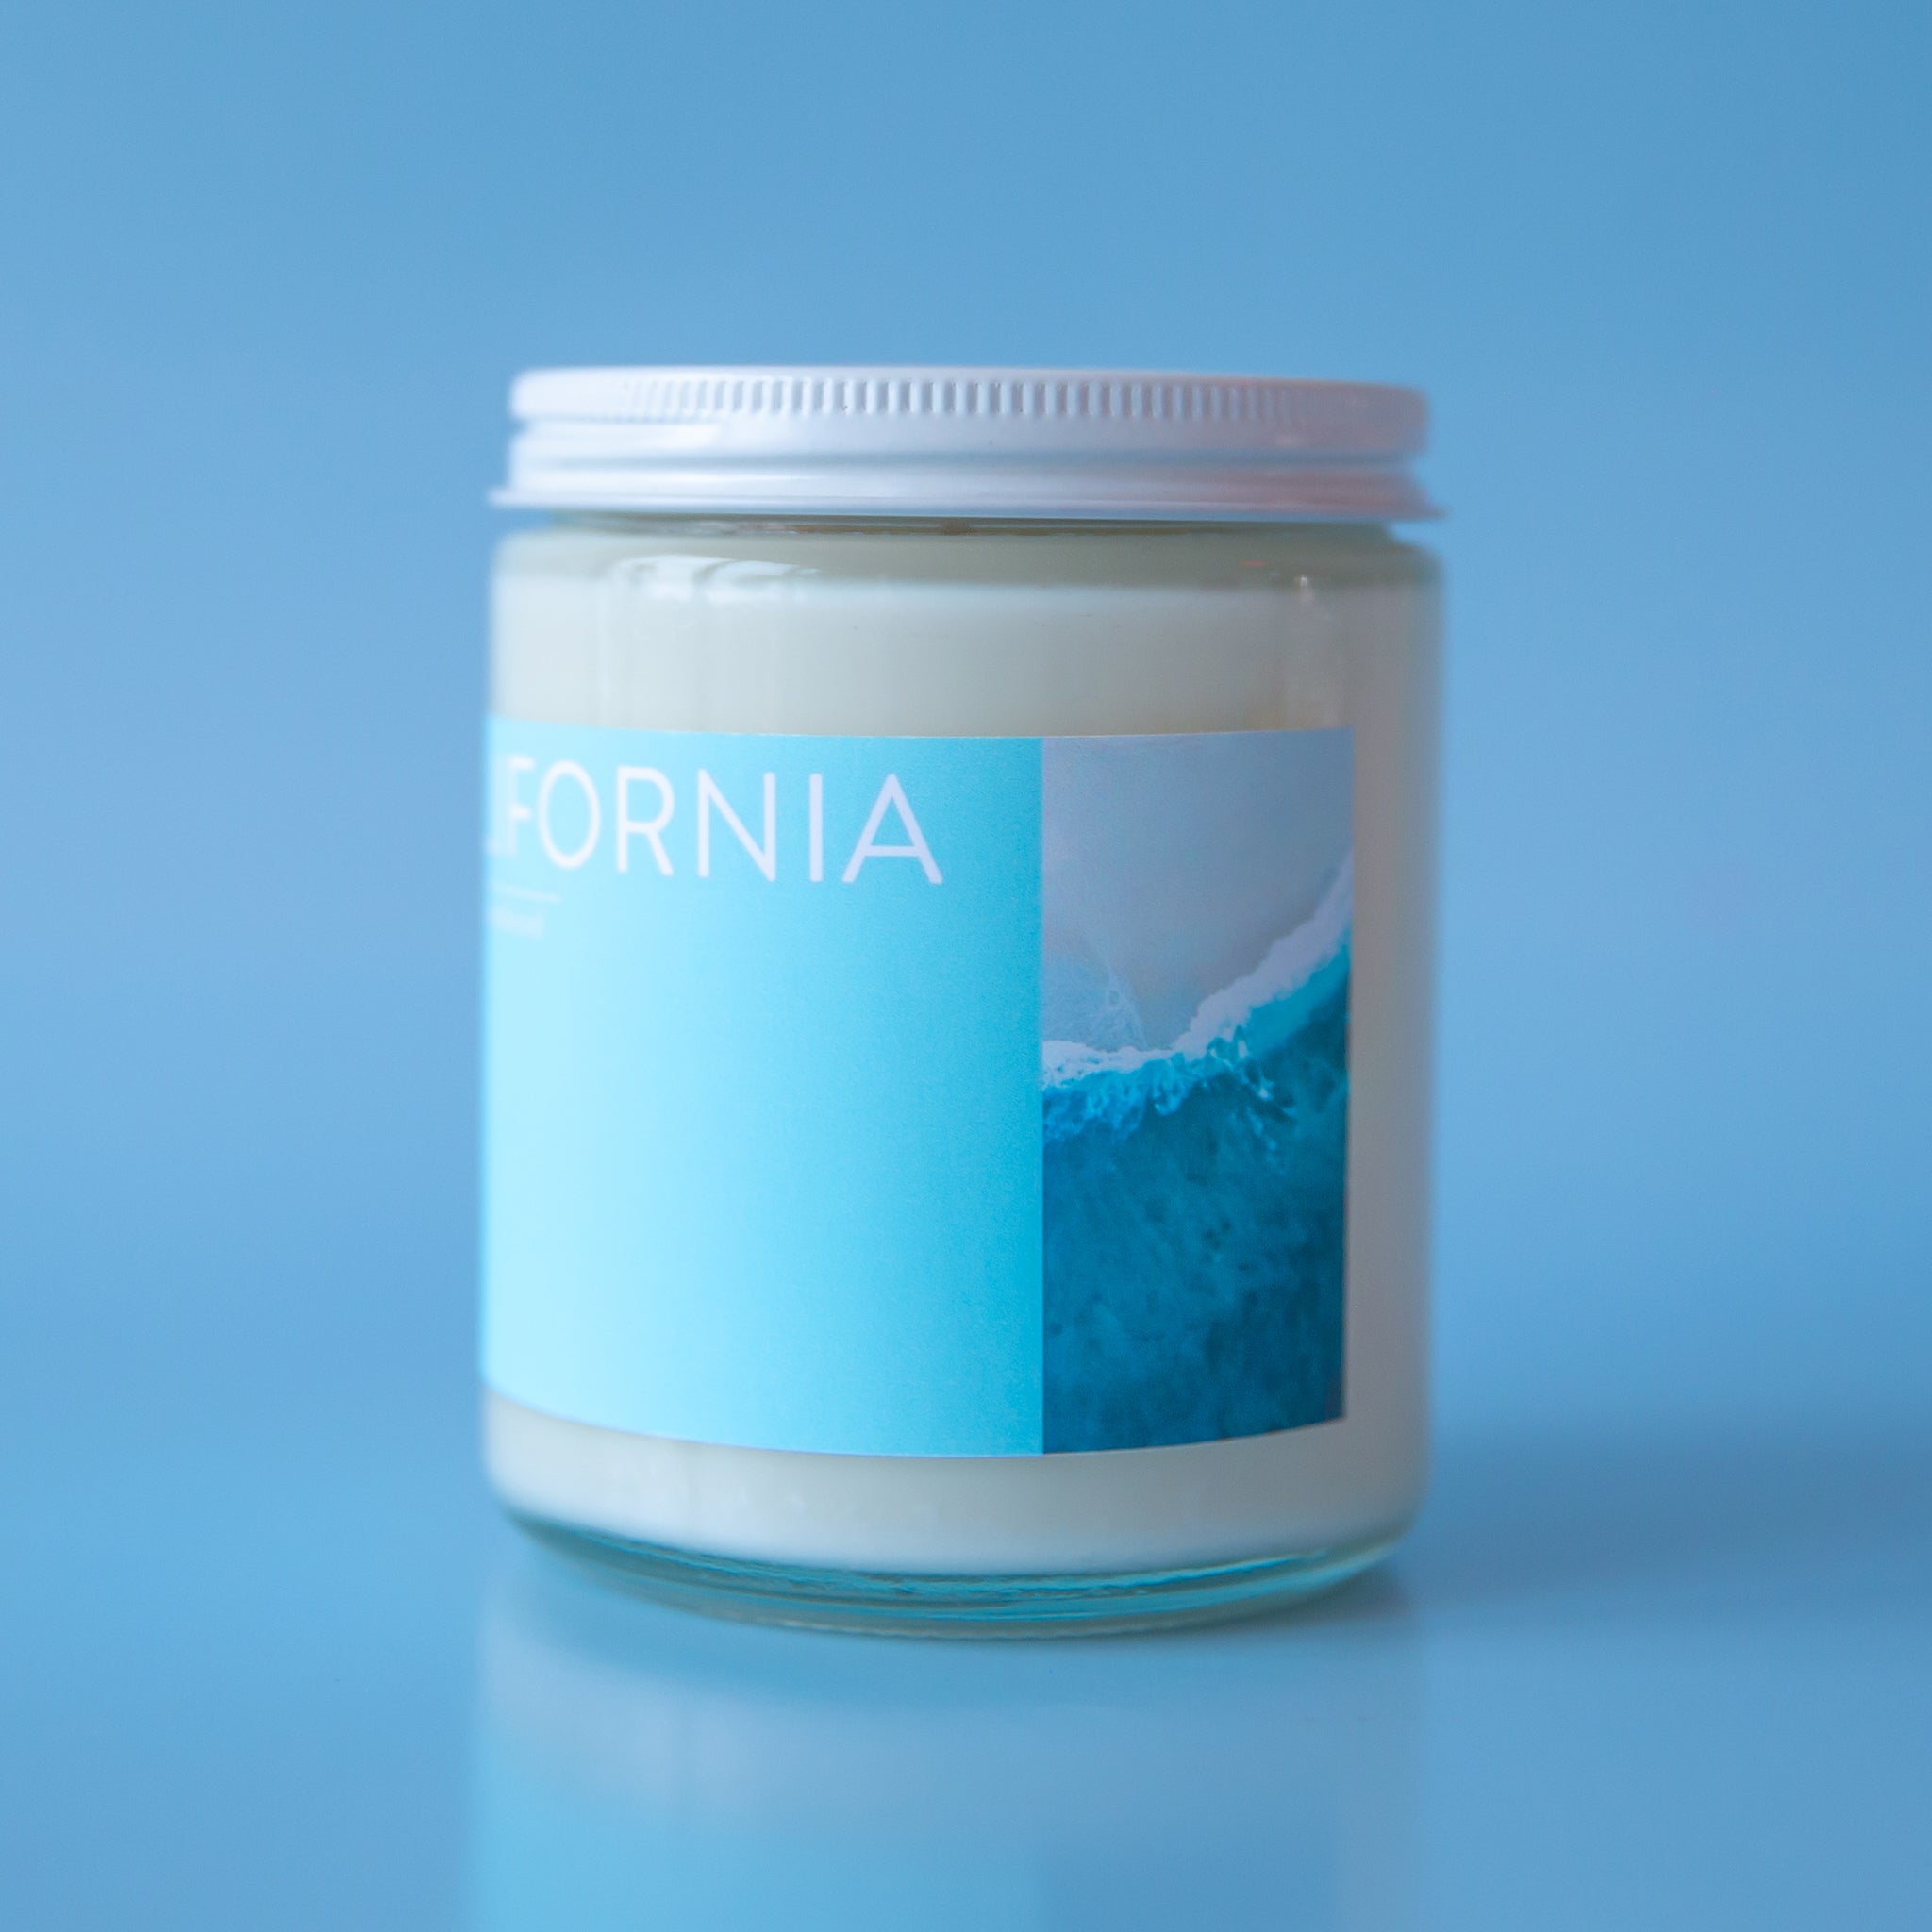 On a blue background is a clear glass jar candle with a light blue rectangular label across the front the reads, &quot;California&quot; in white letters and a white screw on lid.